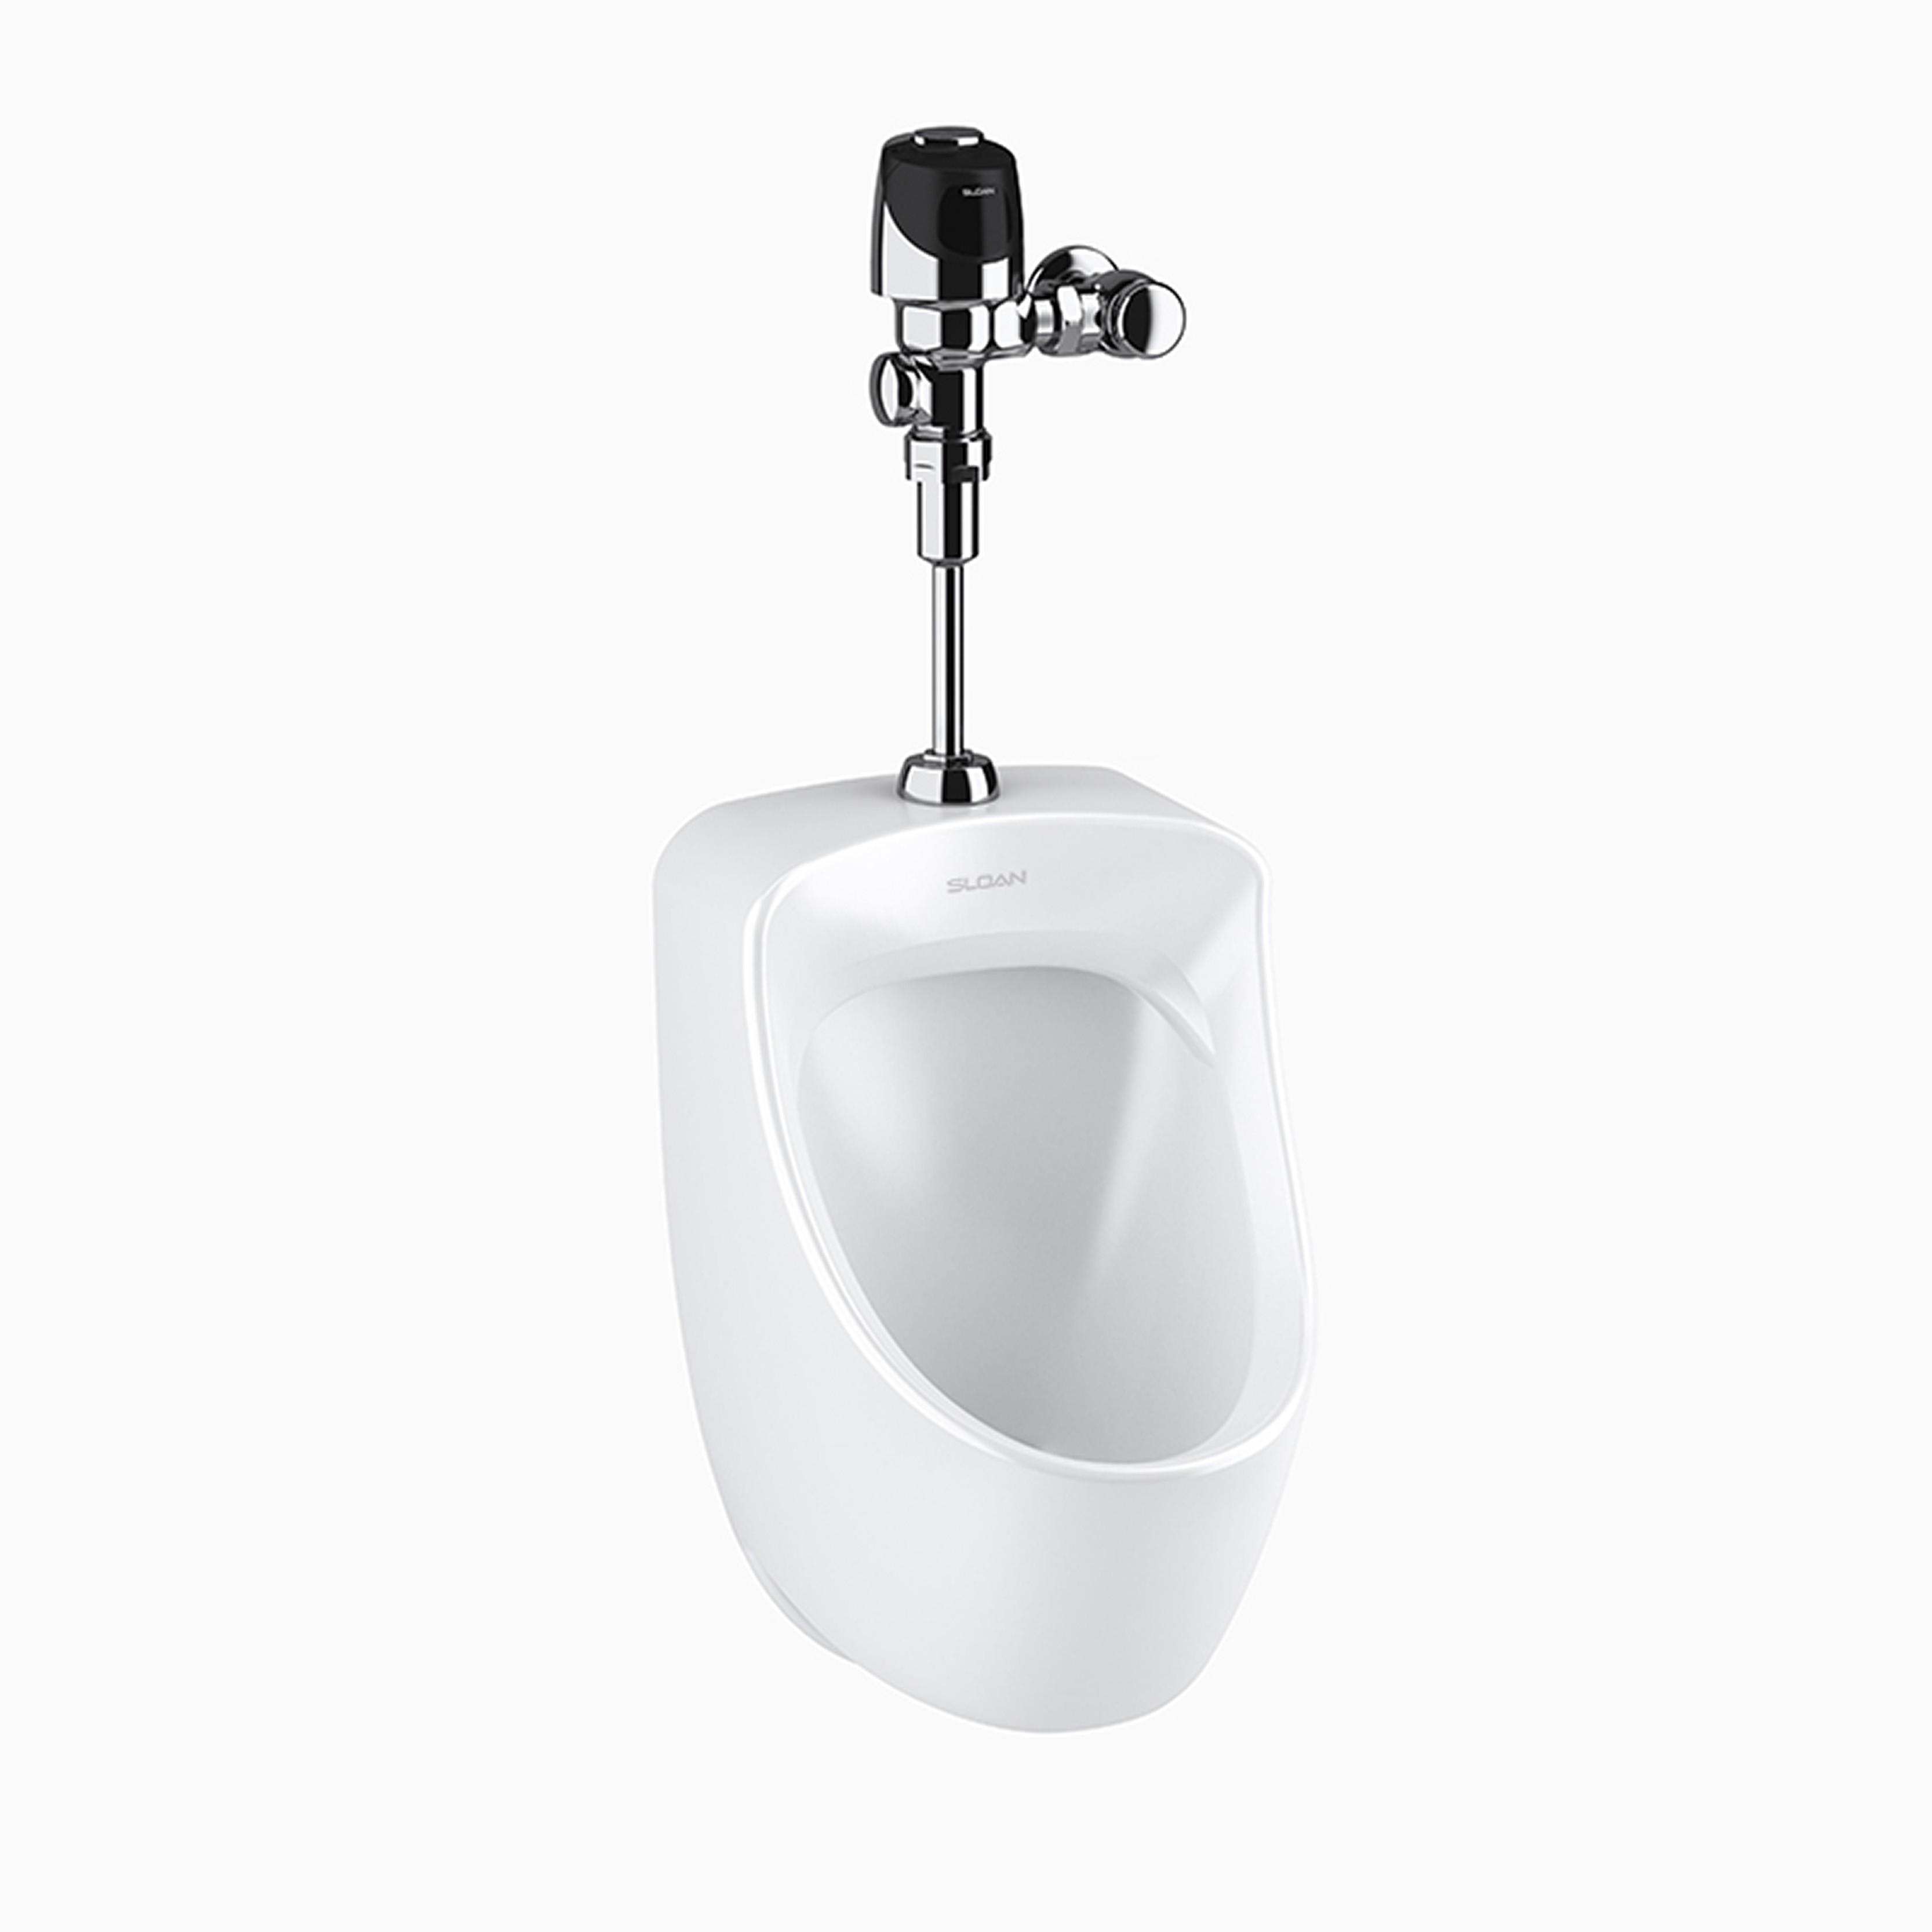 SLOAN 70051410 WEUS-7005.1410 SU-7009 SMALL URINAL AND G2 8186 FLUSHOMETER